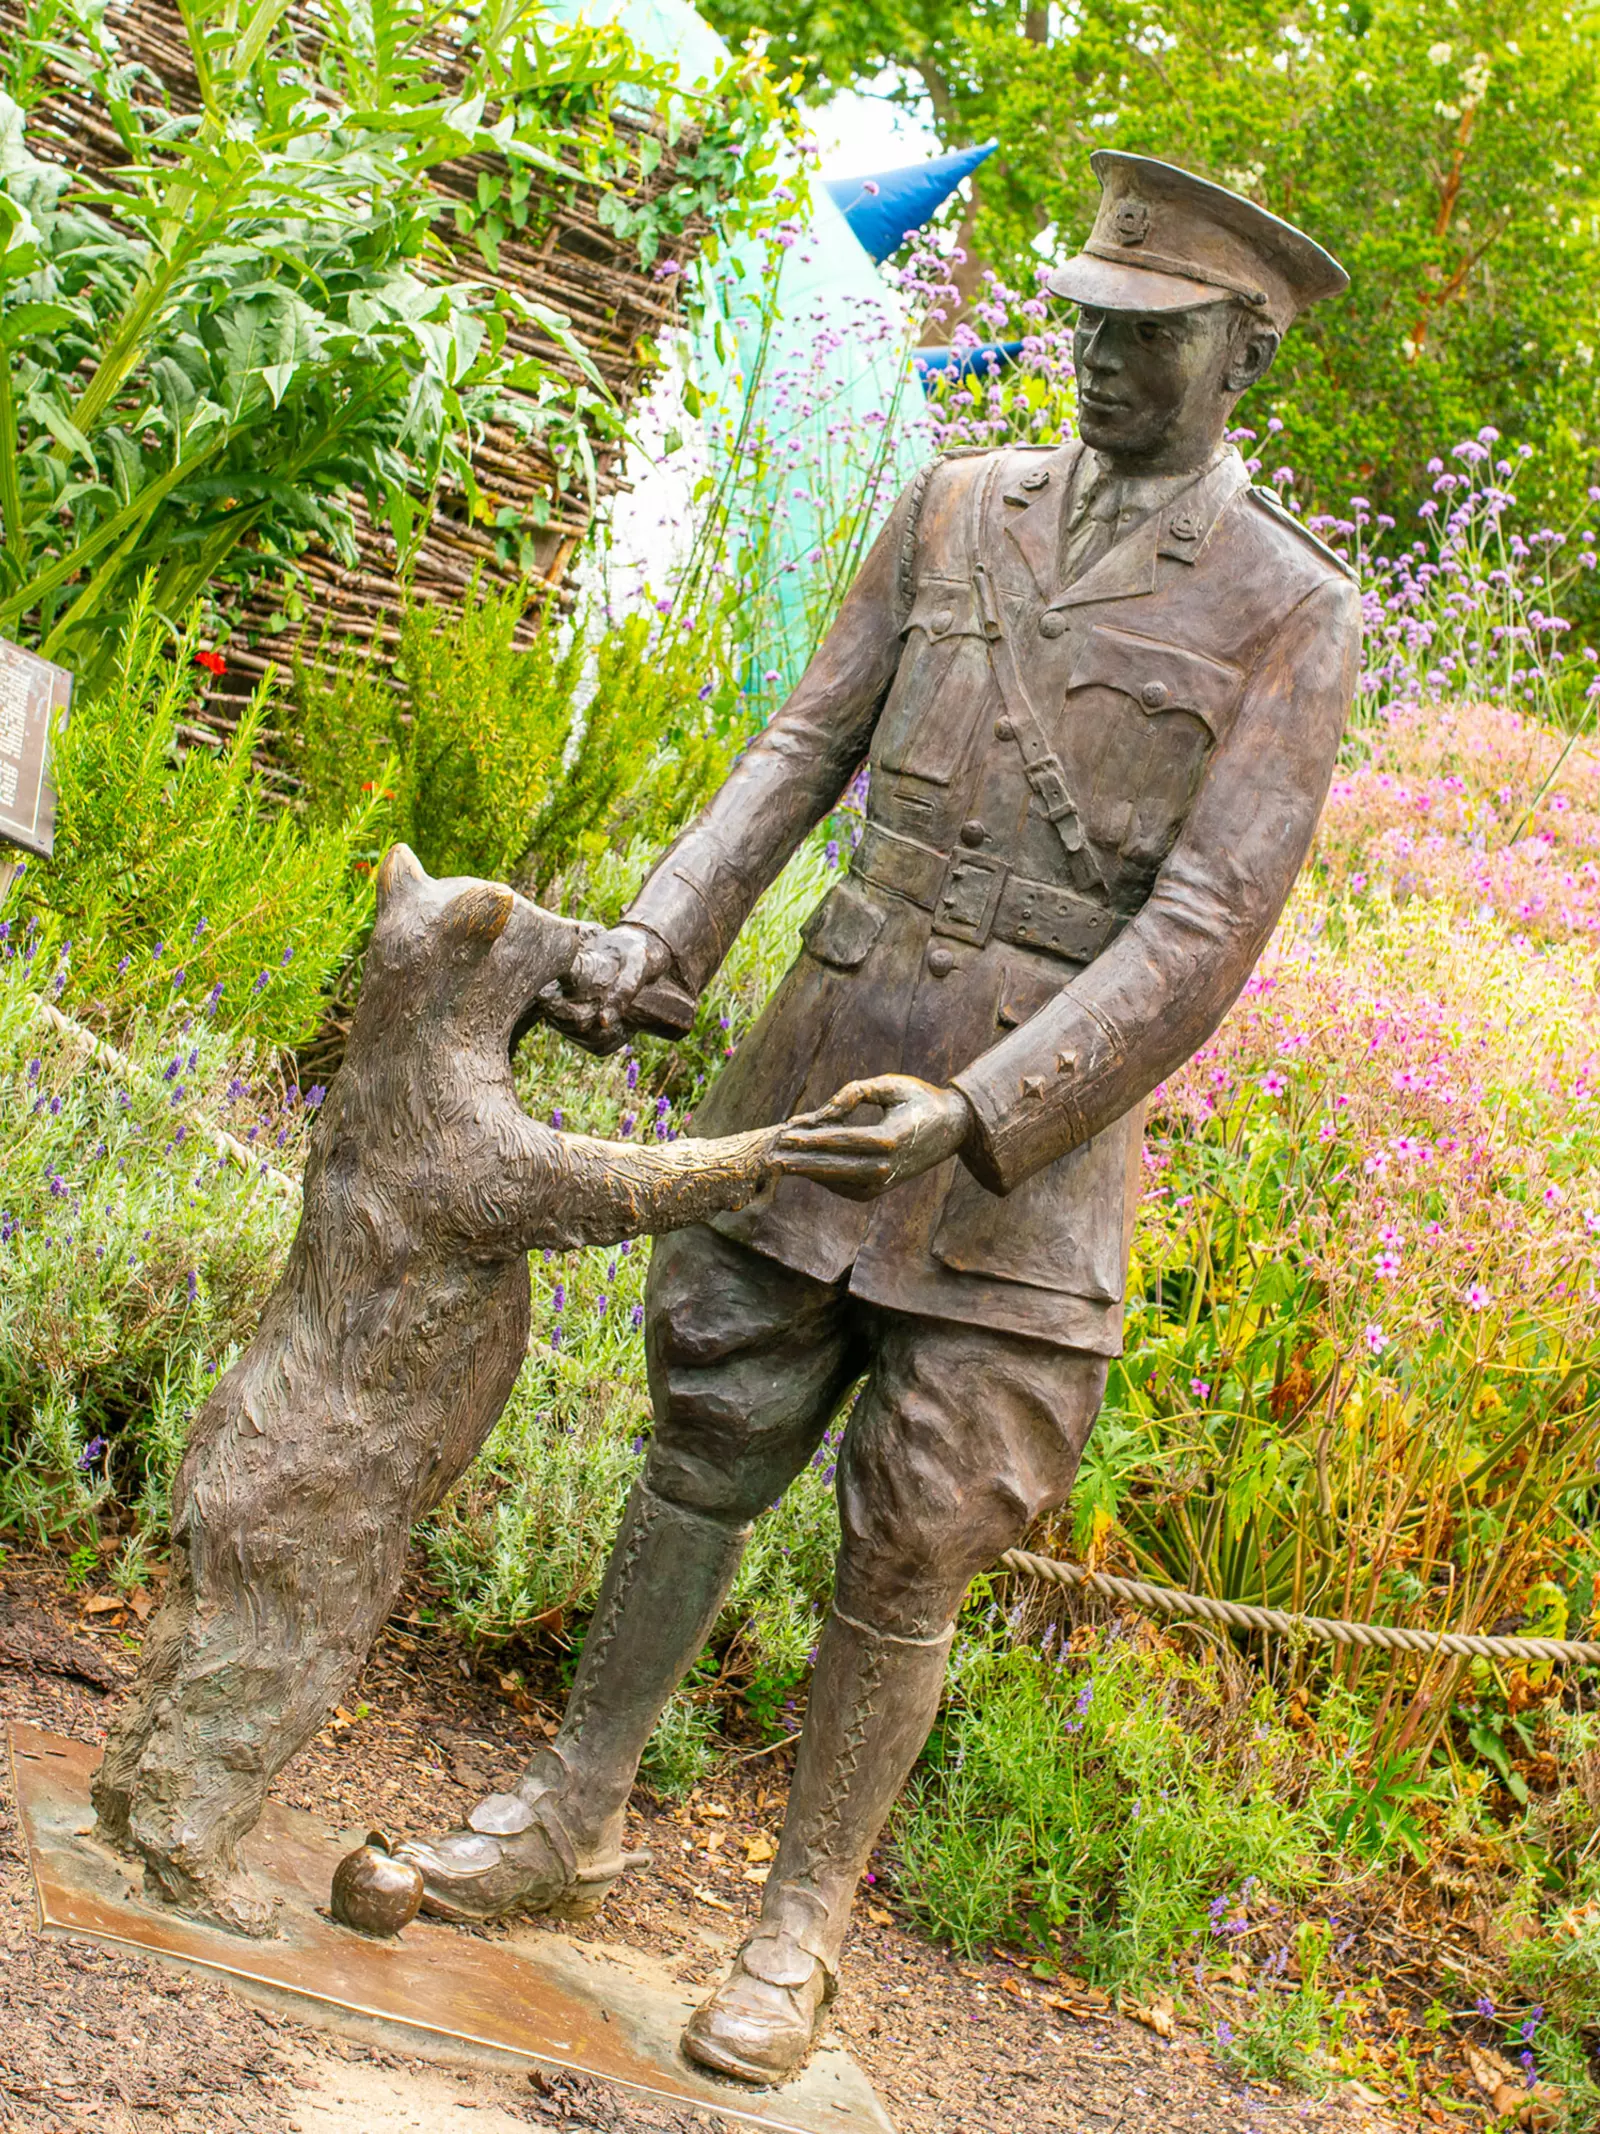 Statue of Winnie the bear being fed by Lieutenant Harry Colebourn at London Zoo